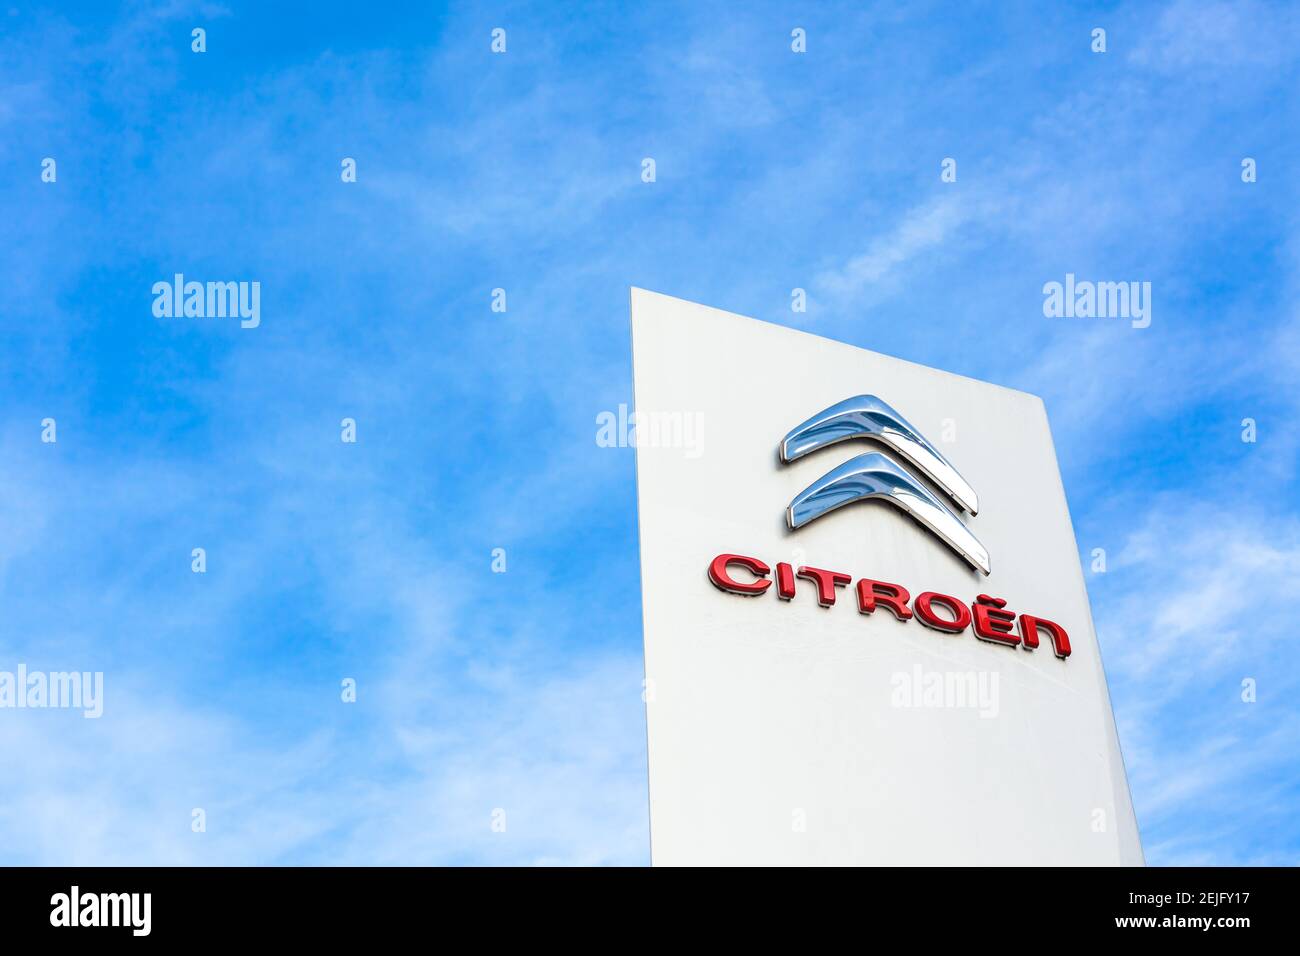 Citroen brand logo on bright blue sky background located in Lyon, France - February 23, 2020 Stock Photo